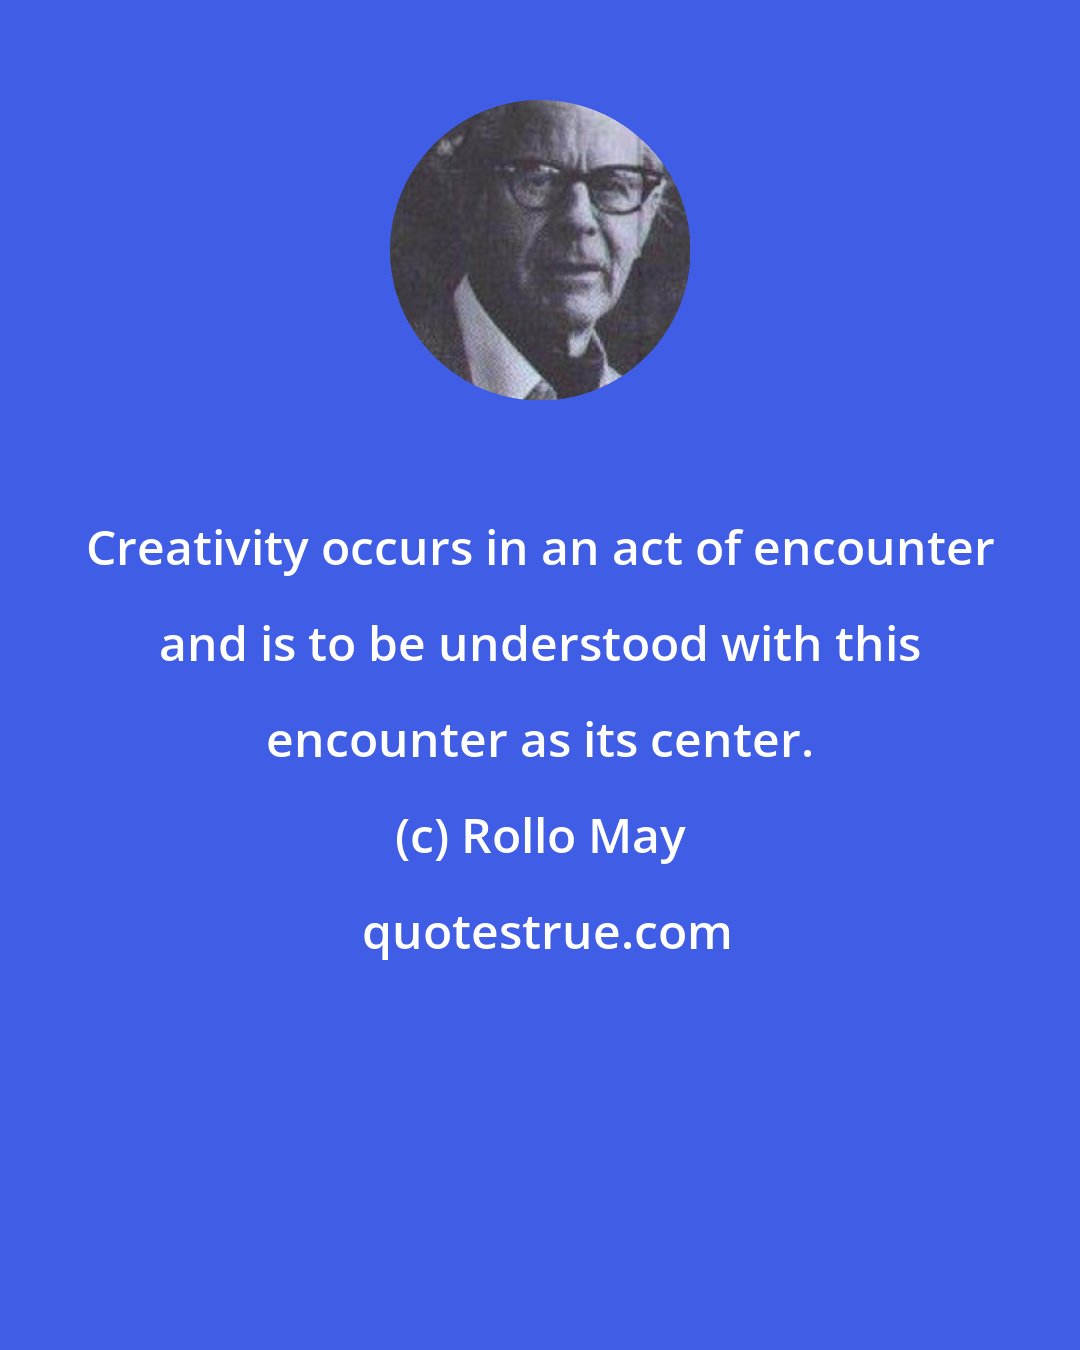 Rollo May: Creativity occurs in an act of encounter and is to be understood with this encounter as its center.